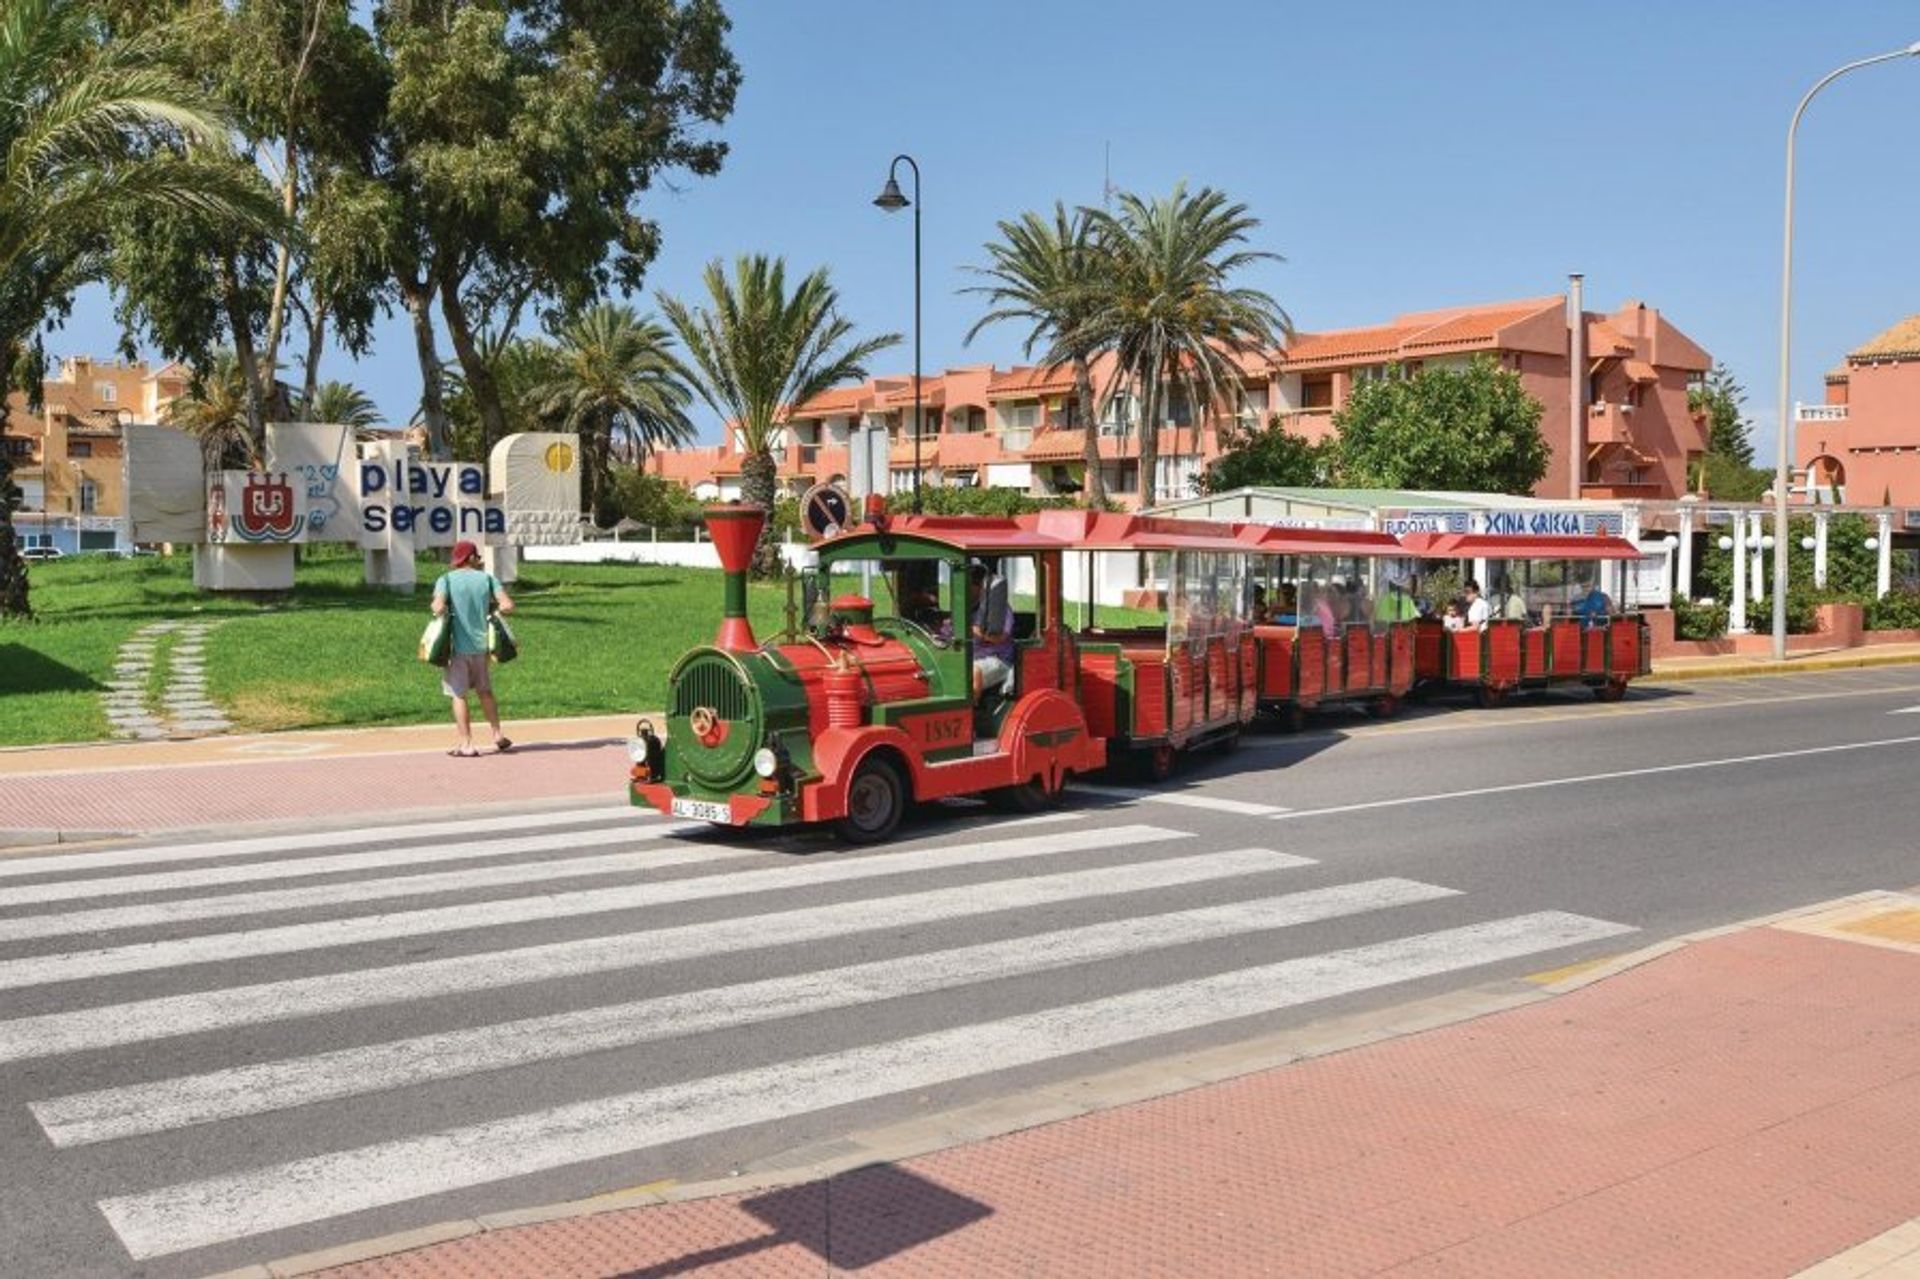 Take a mini-train tour around the resort and discover the main local hotspots